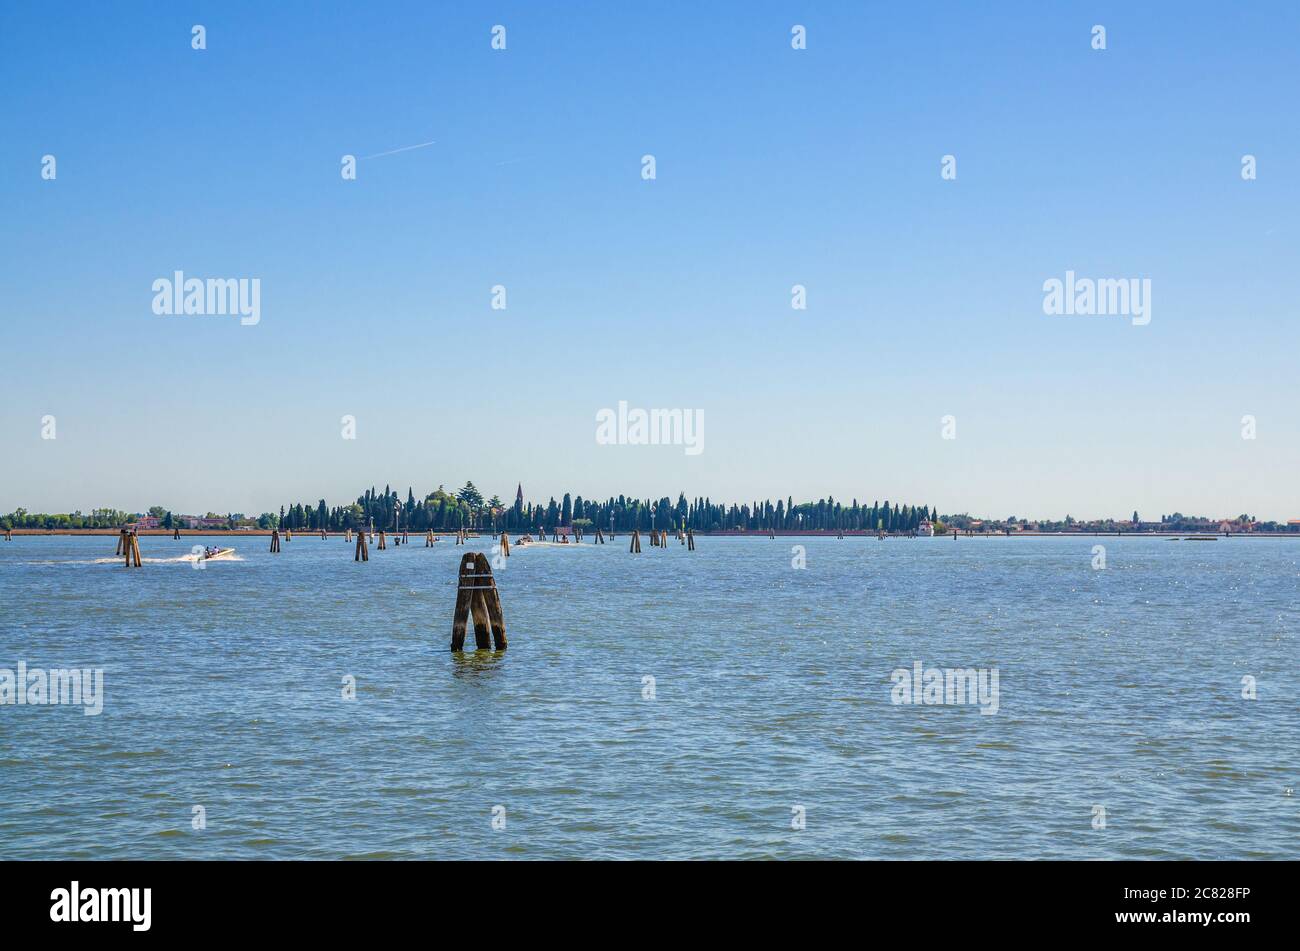 Panoramic view of San Francesco del Deserto island in Venetian Lagoon water with wooden poles. View from Burano island. Venice Province, Veneto Region, Northern Italy Stock Photo